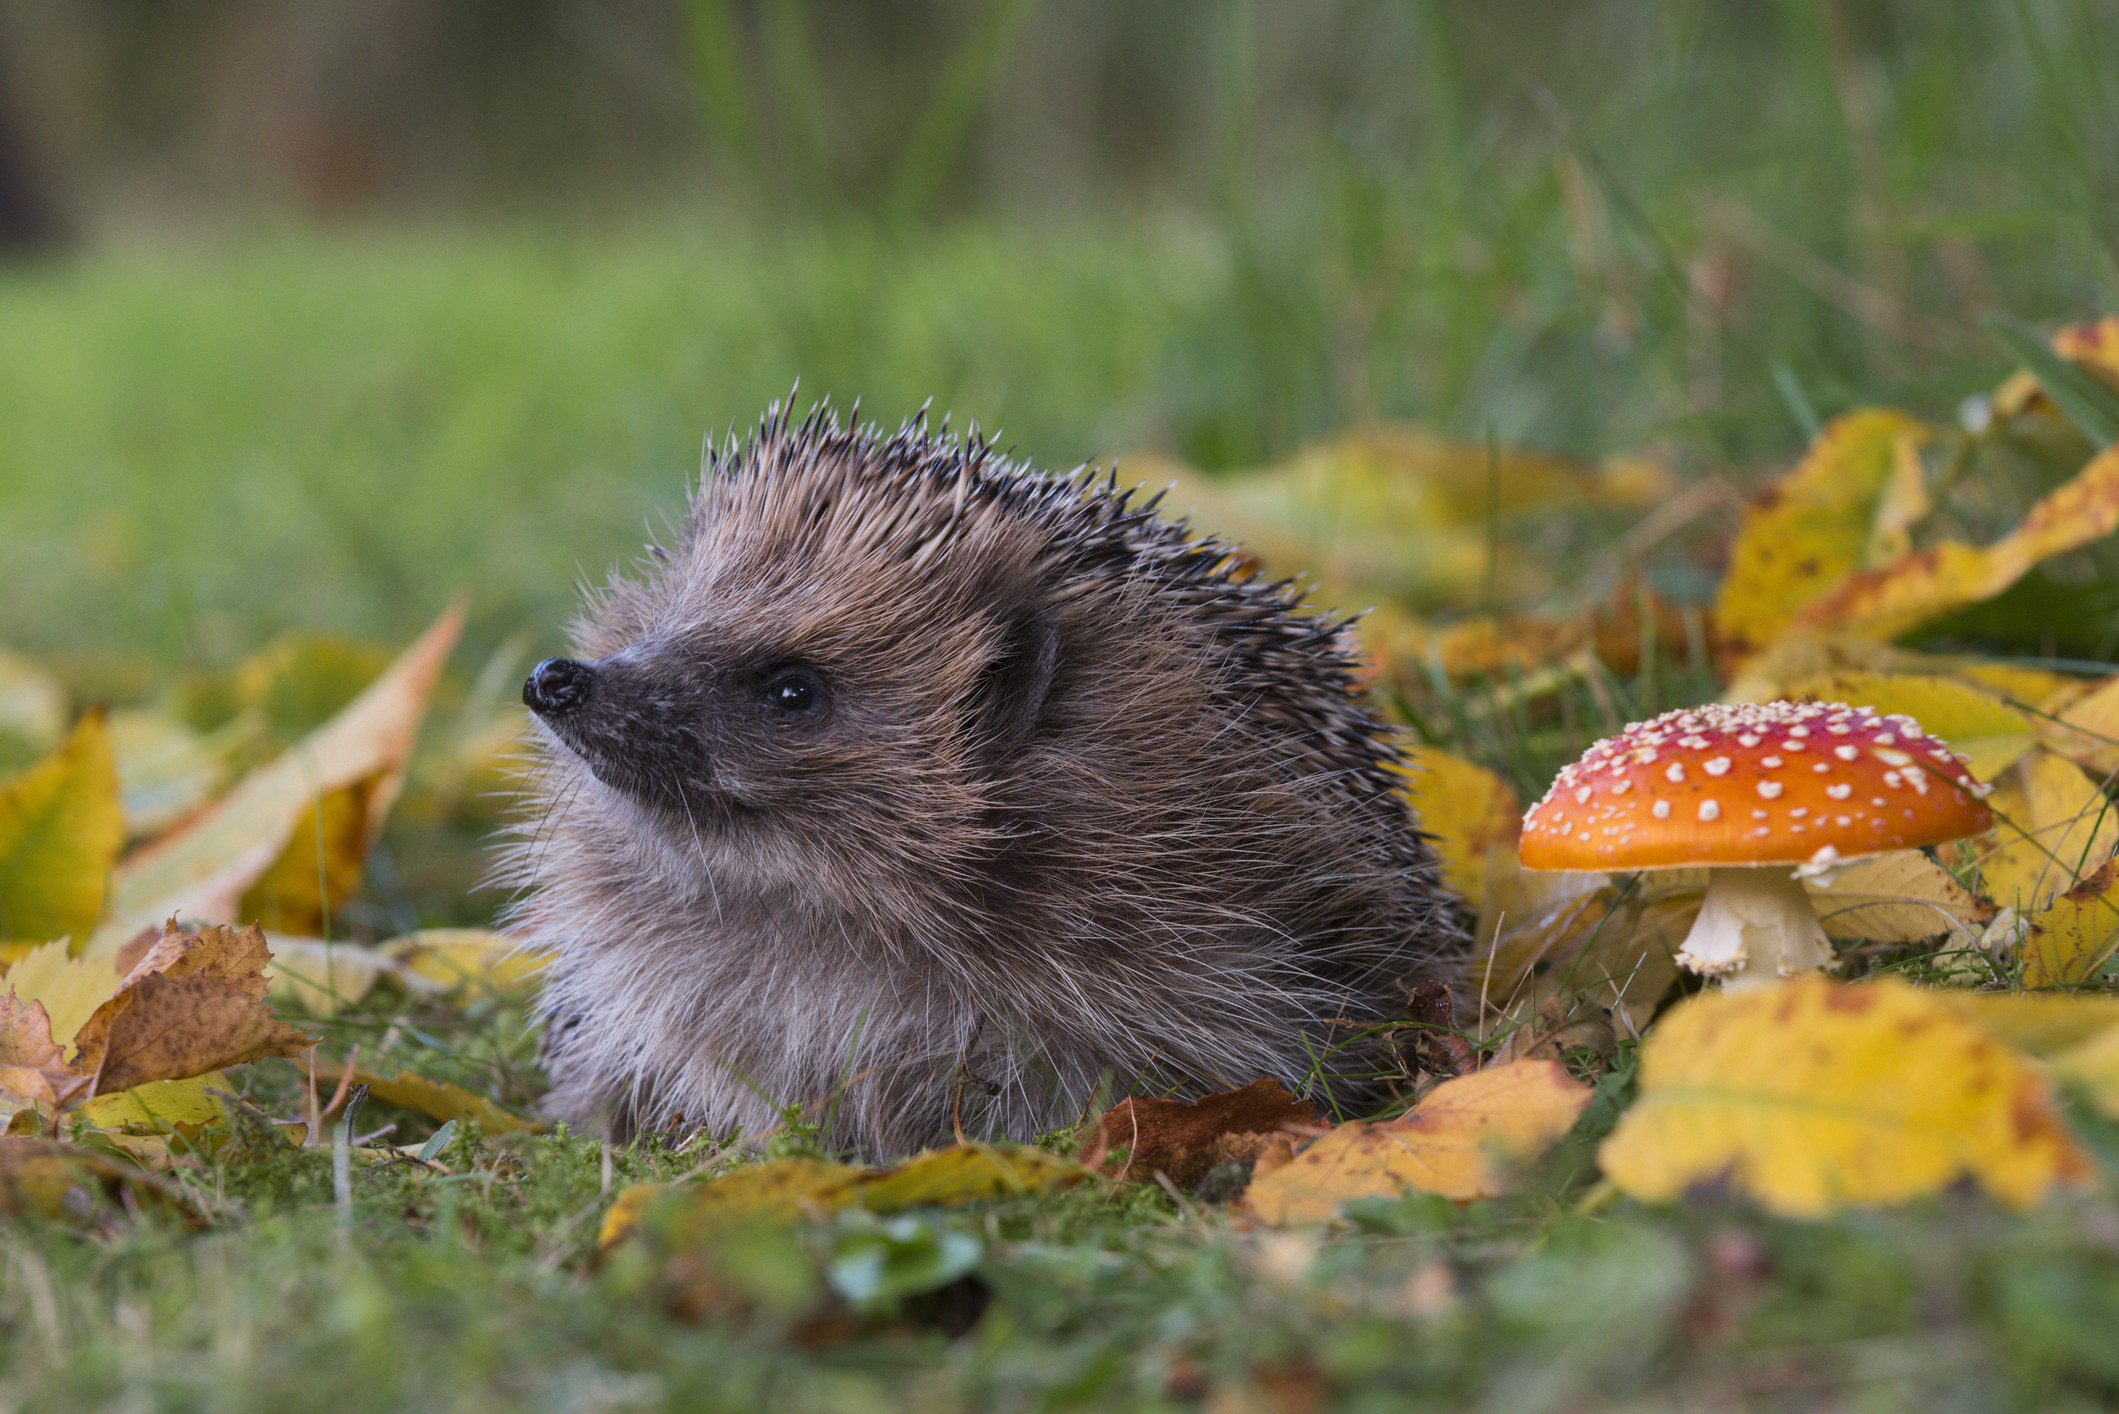 Hedgehog in the grass next to a mushroom and leaves